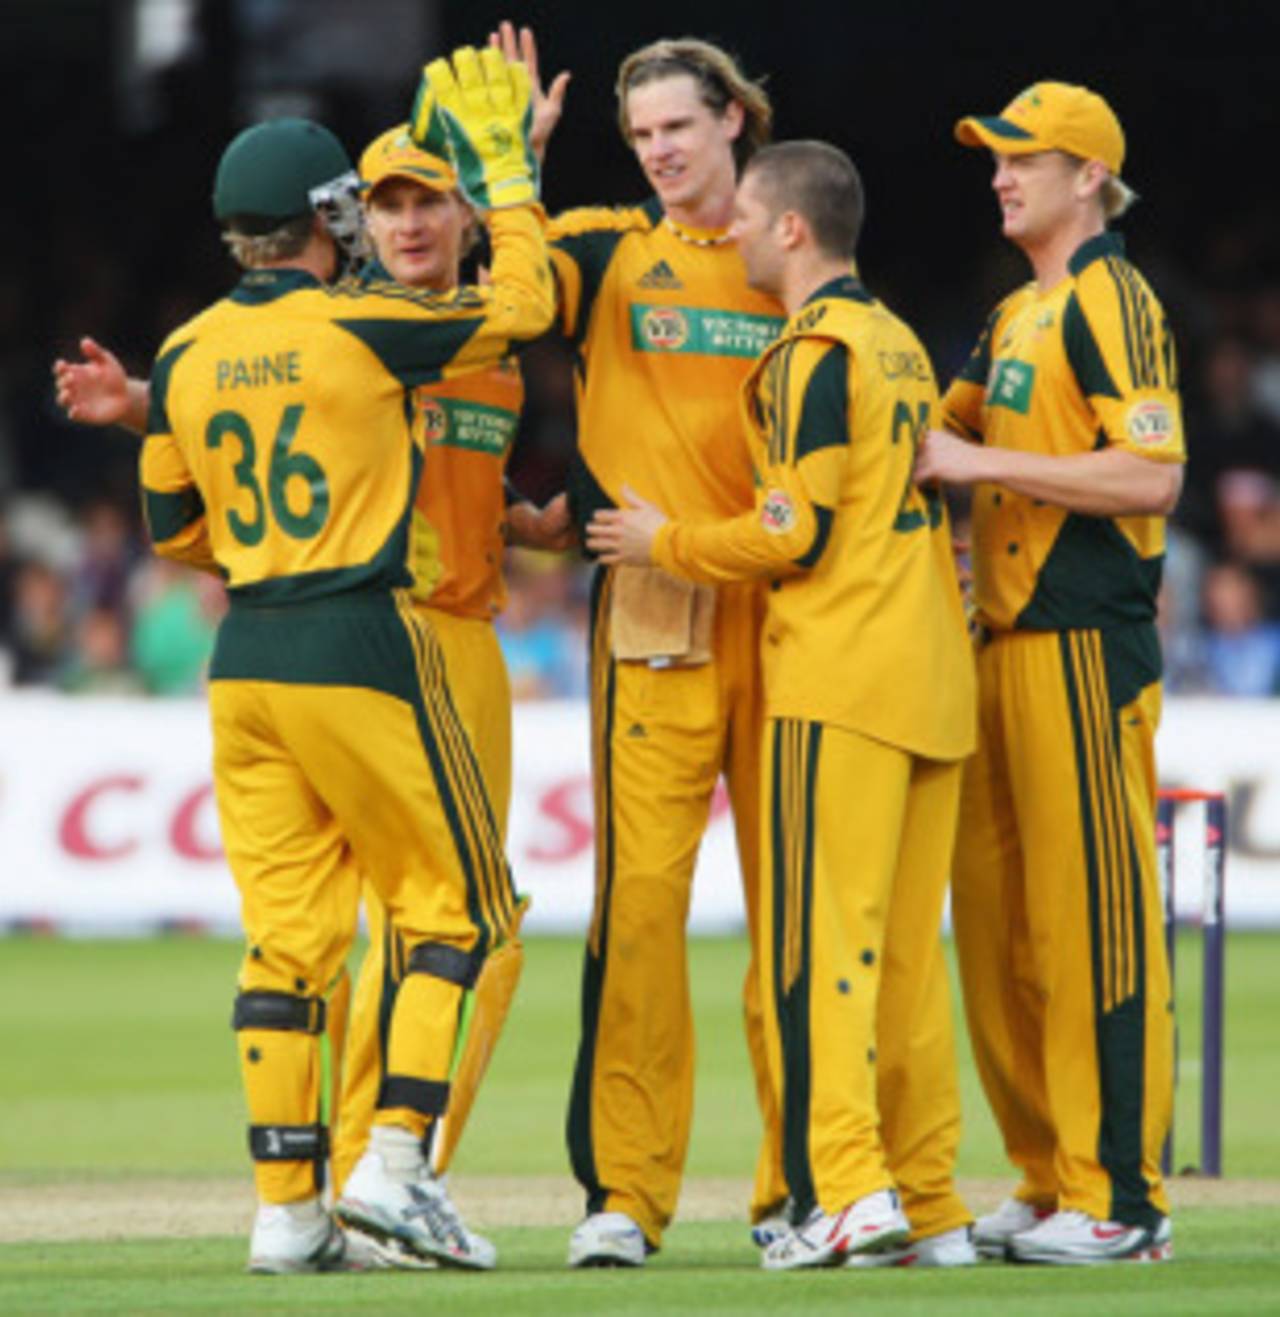 Nathan Bracken is congratulated on one of his two wickets, England v Australia, 2nd ODI, Lord's, September 6, 2009